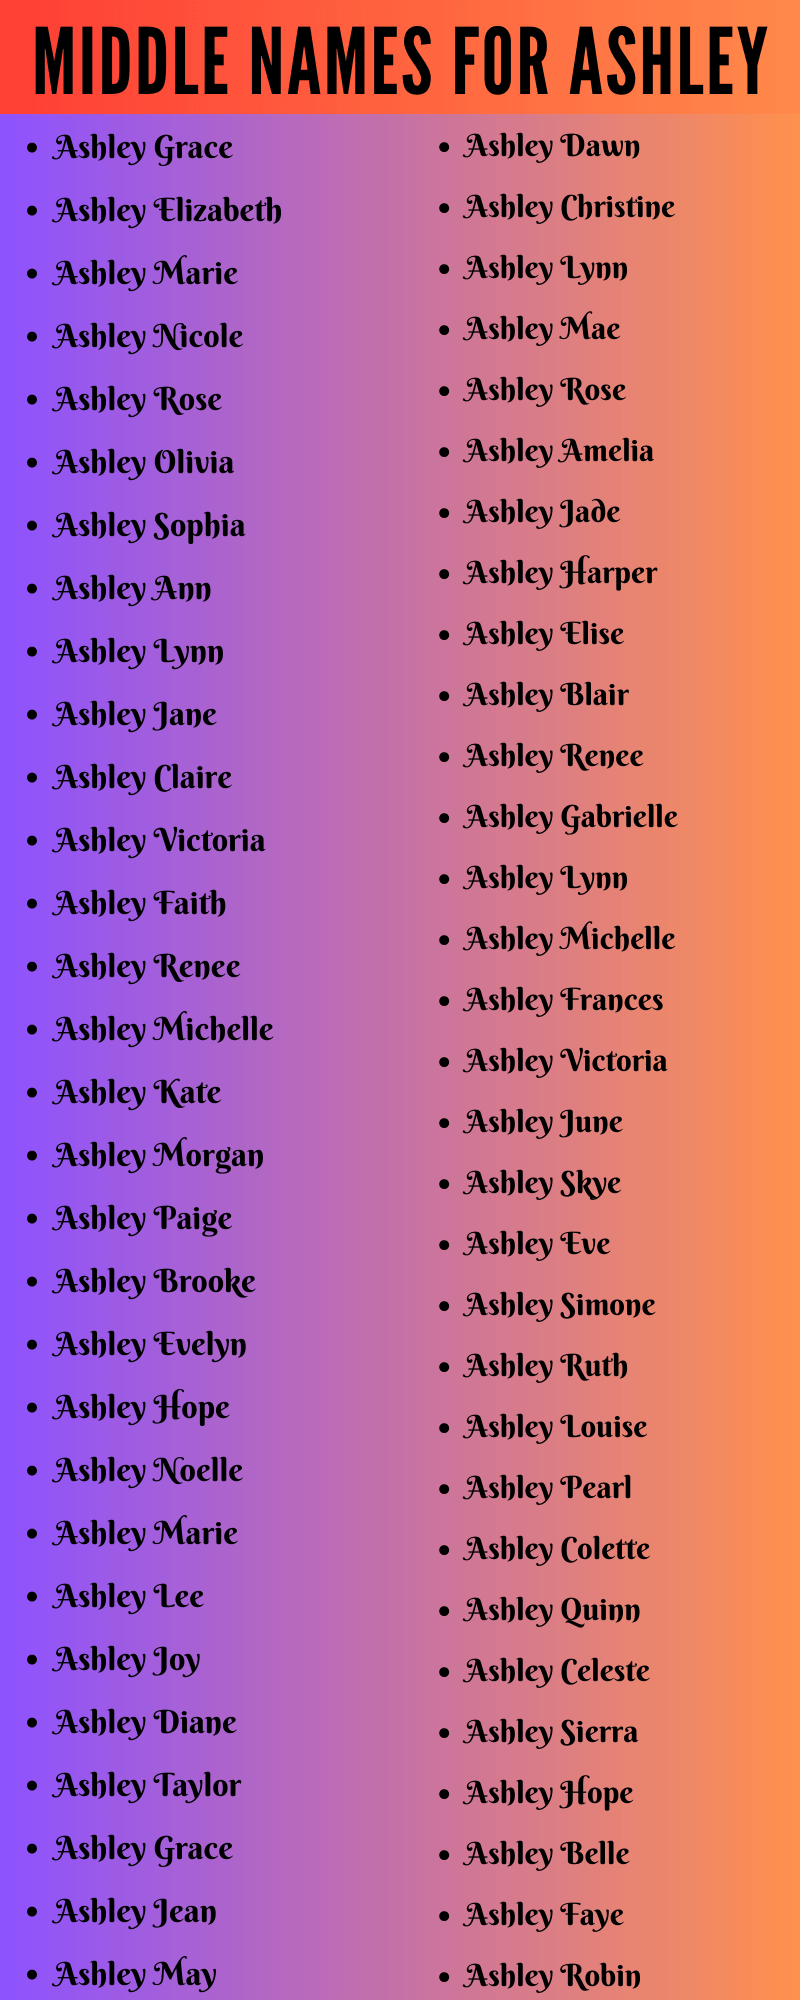 400 Creative Middle Names For Ashley